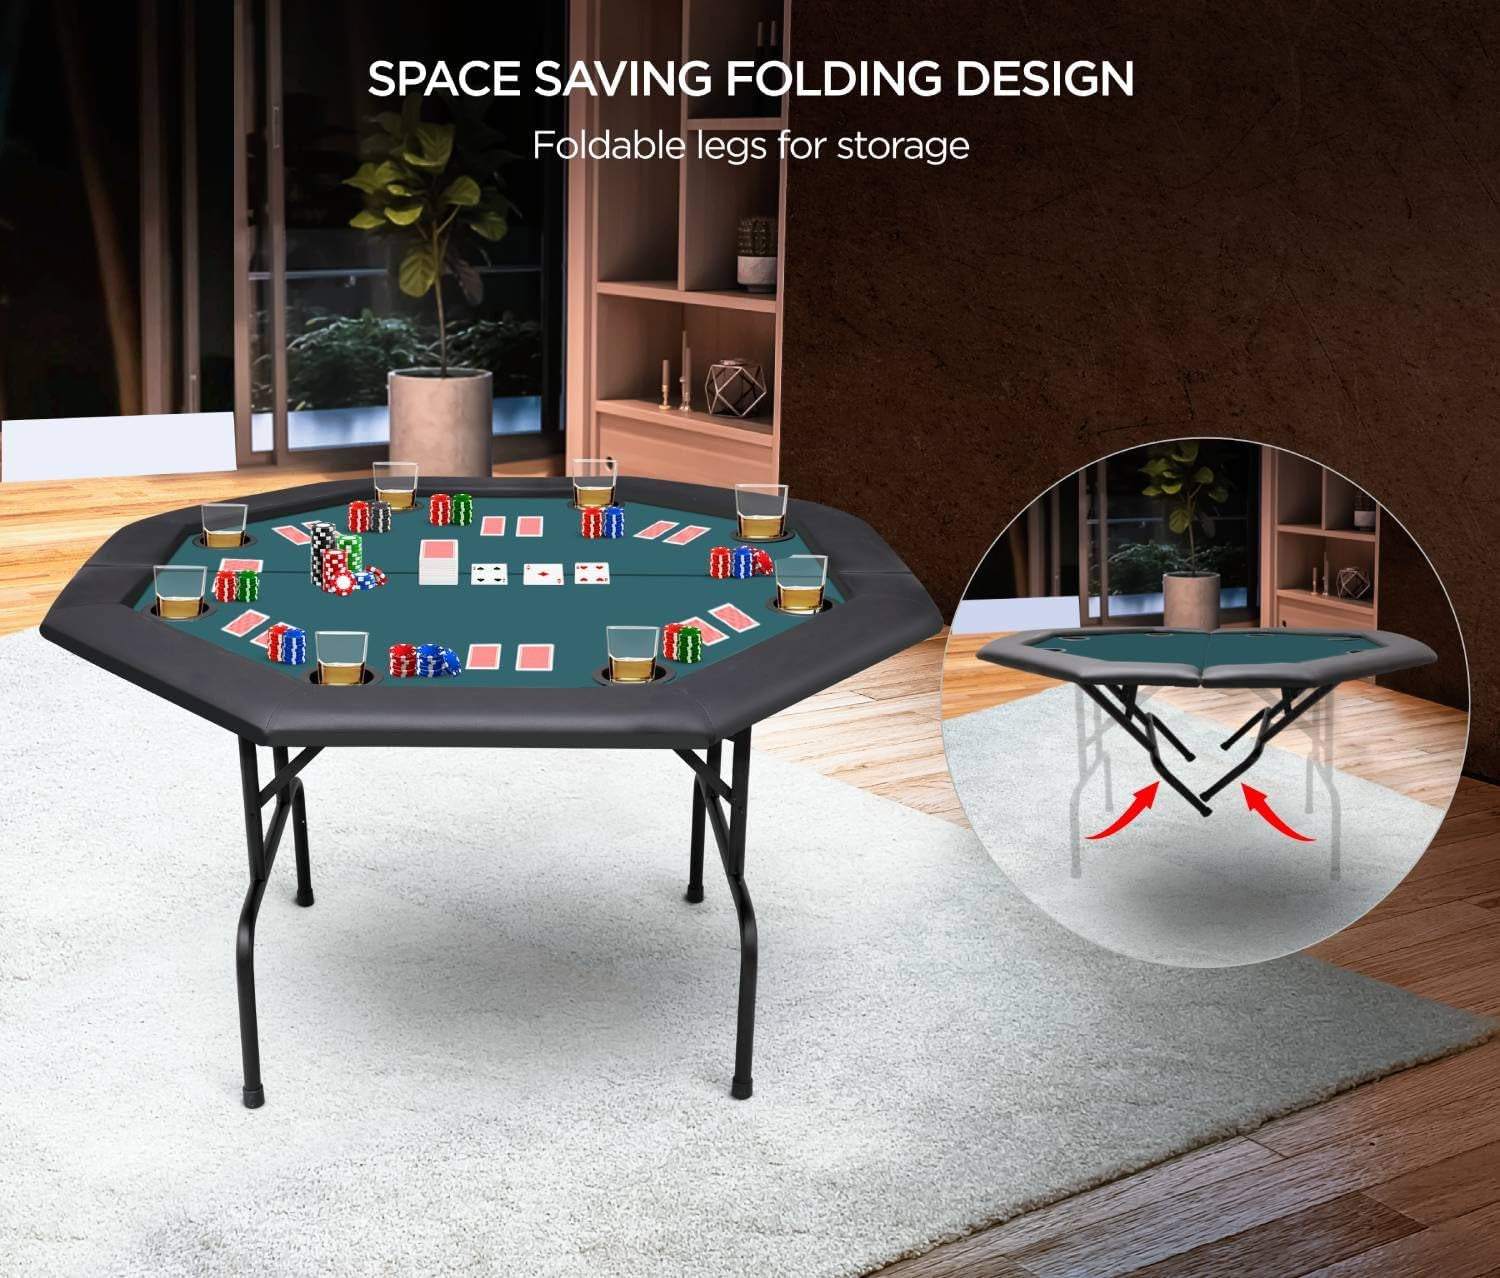 Portable Poker Table Foldable 8 Player Texas Holdem Poker Table with Casino Table Grade Felt Top Cushioned Armrest and 8 Cup Holders for Card Game Gambling Large 48 Inch Octagon Folding Poker Table